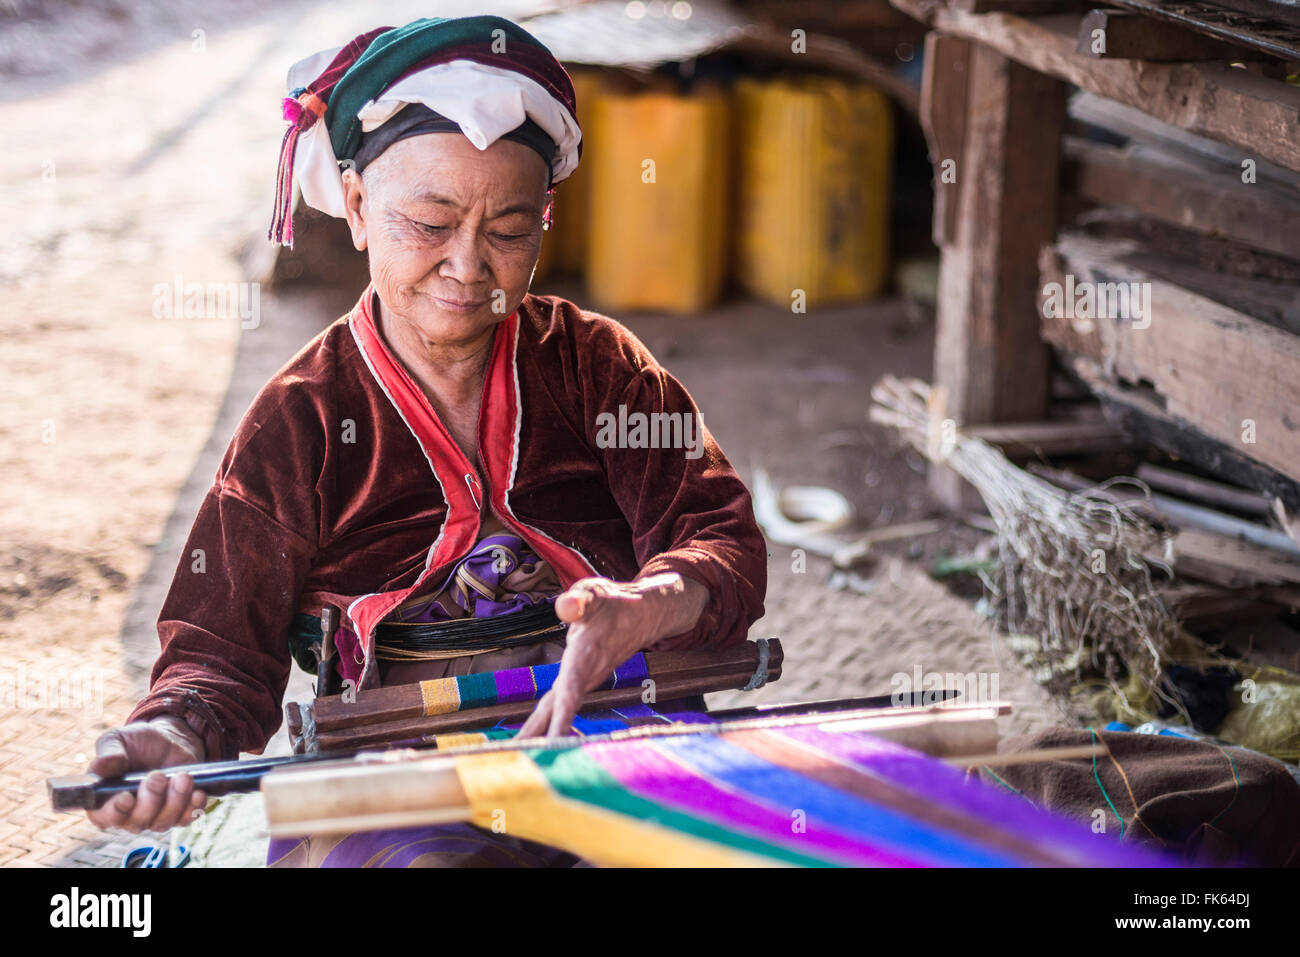 Palaung woman weaving, part of the Palau Hill Tribe near Hsipaw Township, Shan State, Myanmar (Burma), Asia Stock Photo